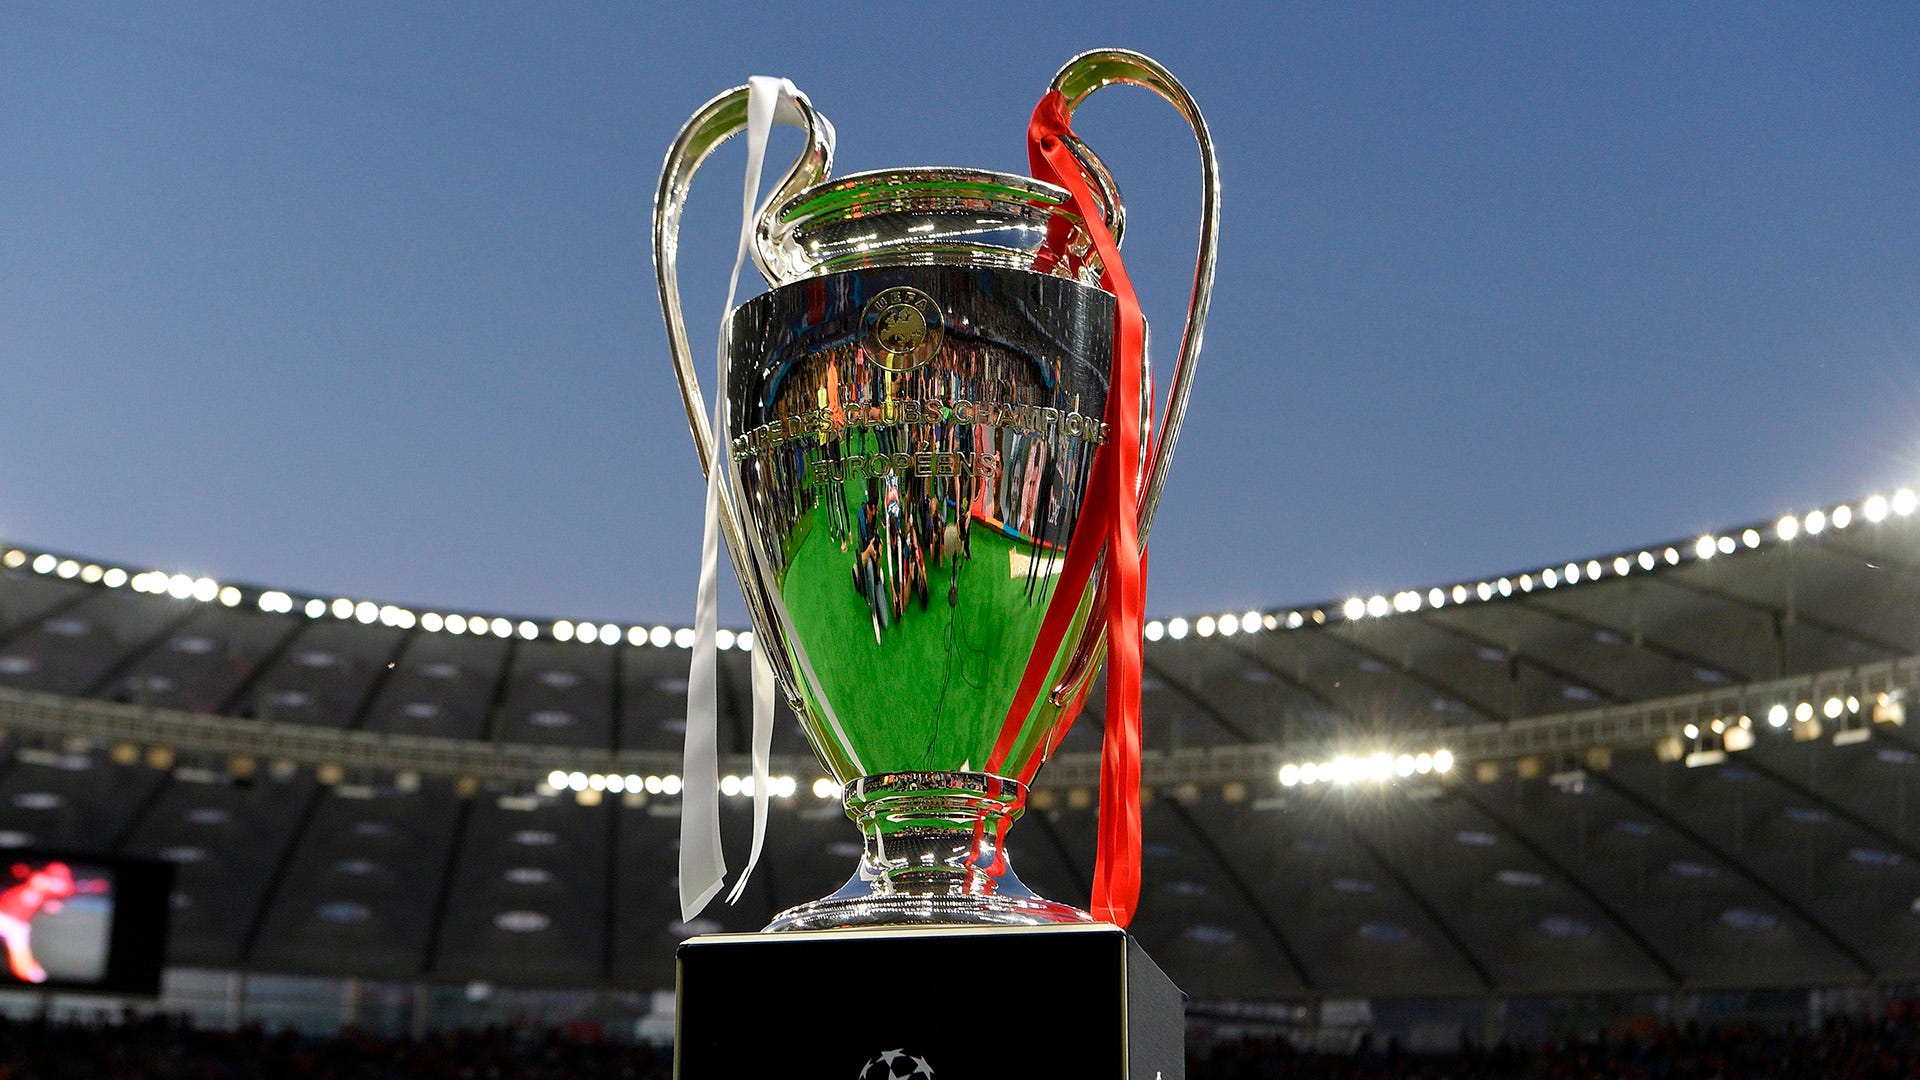 Which nations have the most UEFA Champions League winners?, UEFA Champions  League